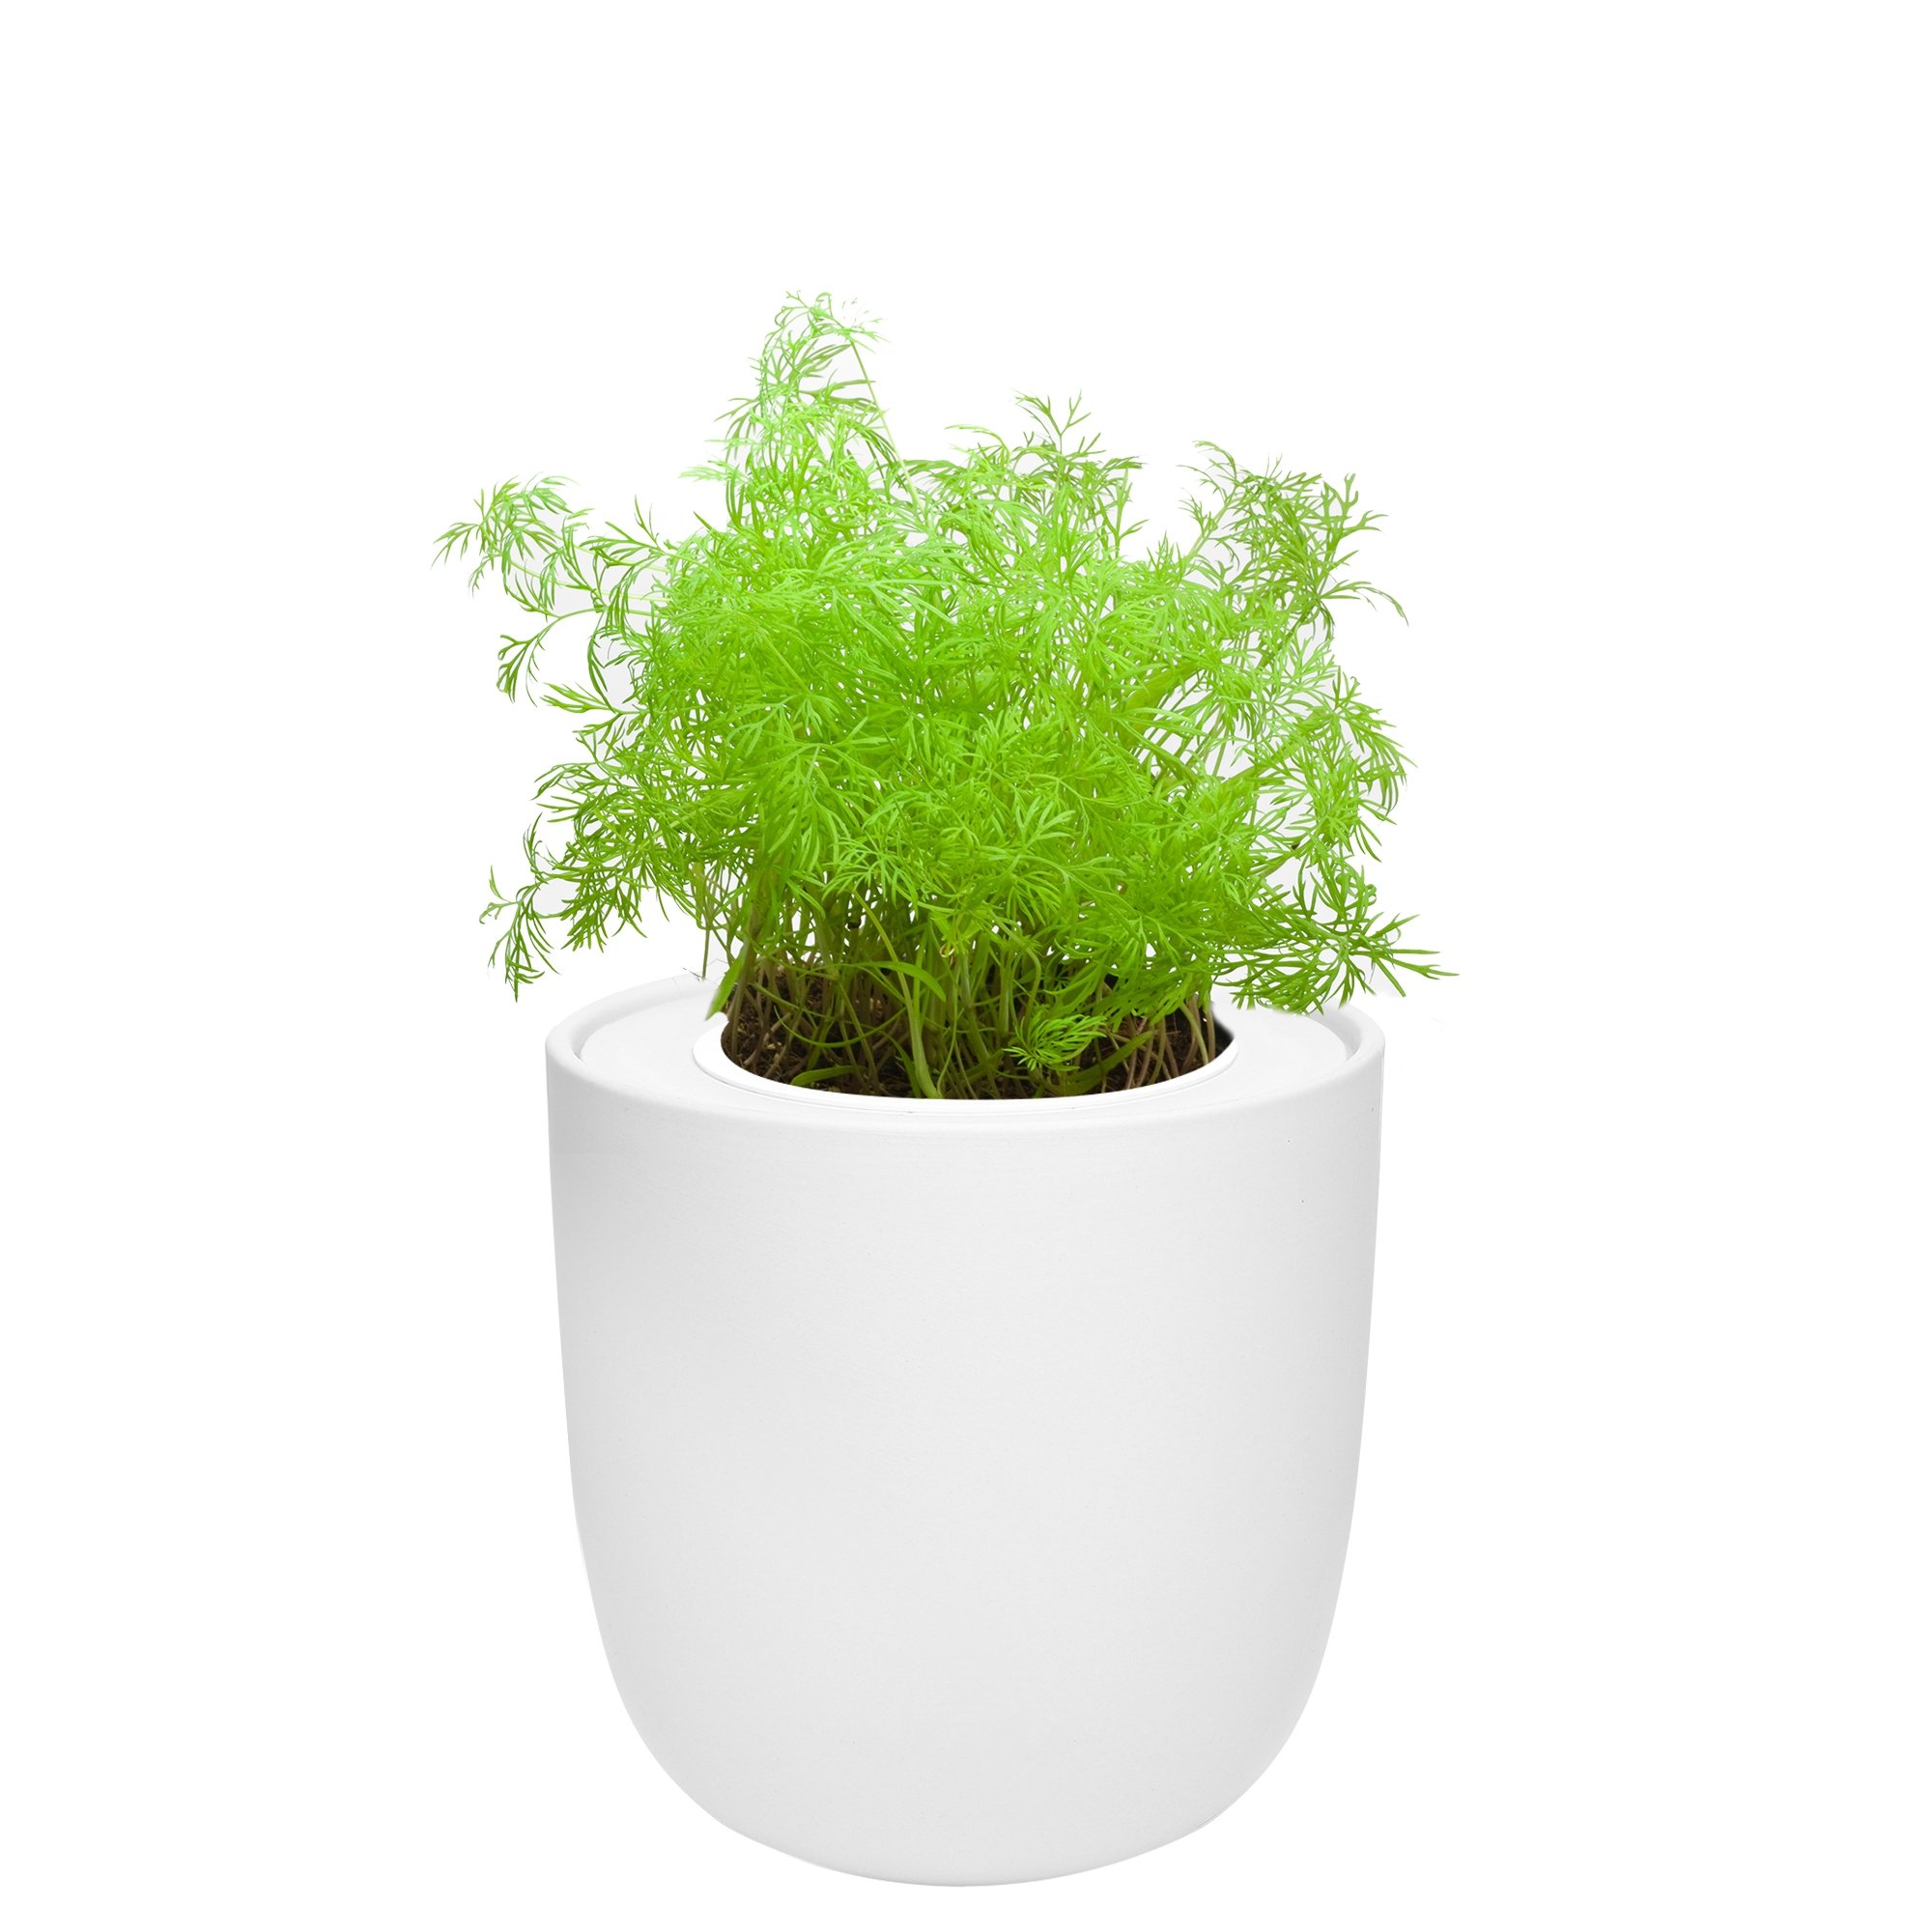 Dill White Ceramic Pot Hydroponic Growing Kit with Organic Seeds